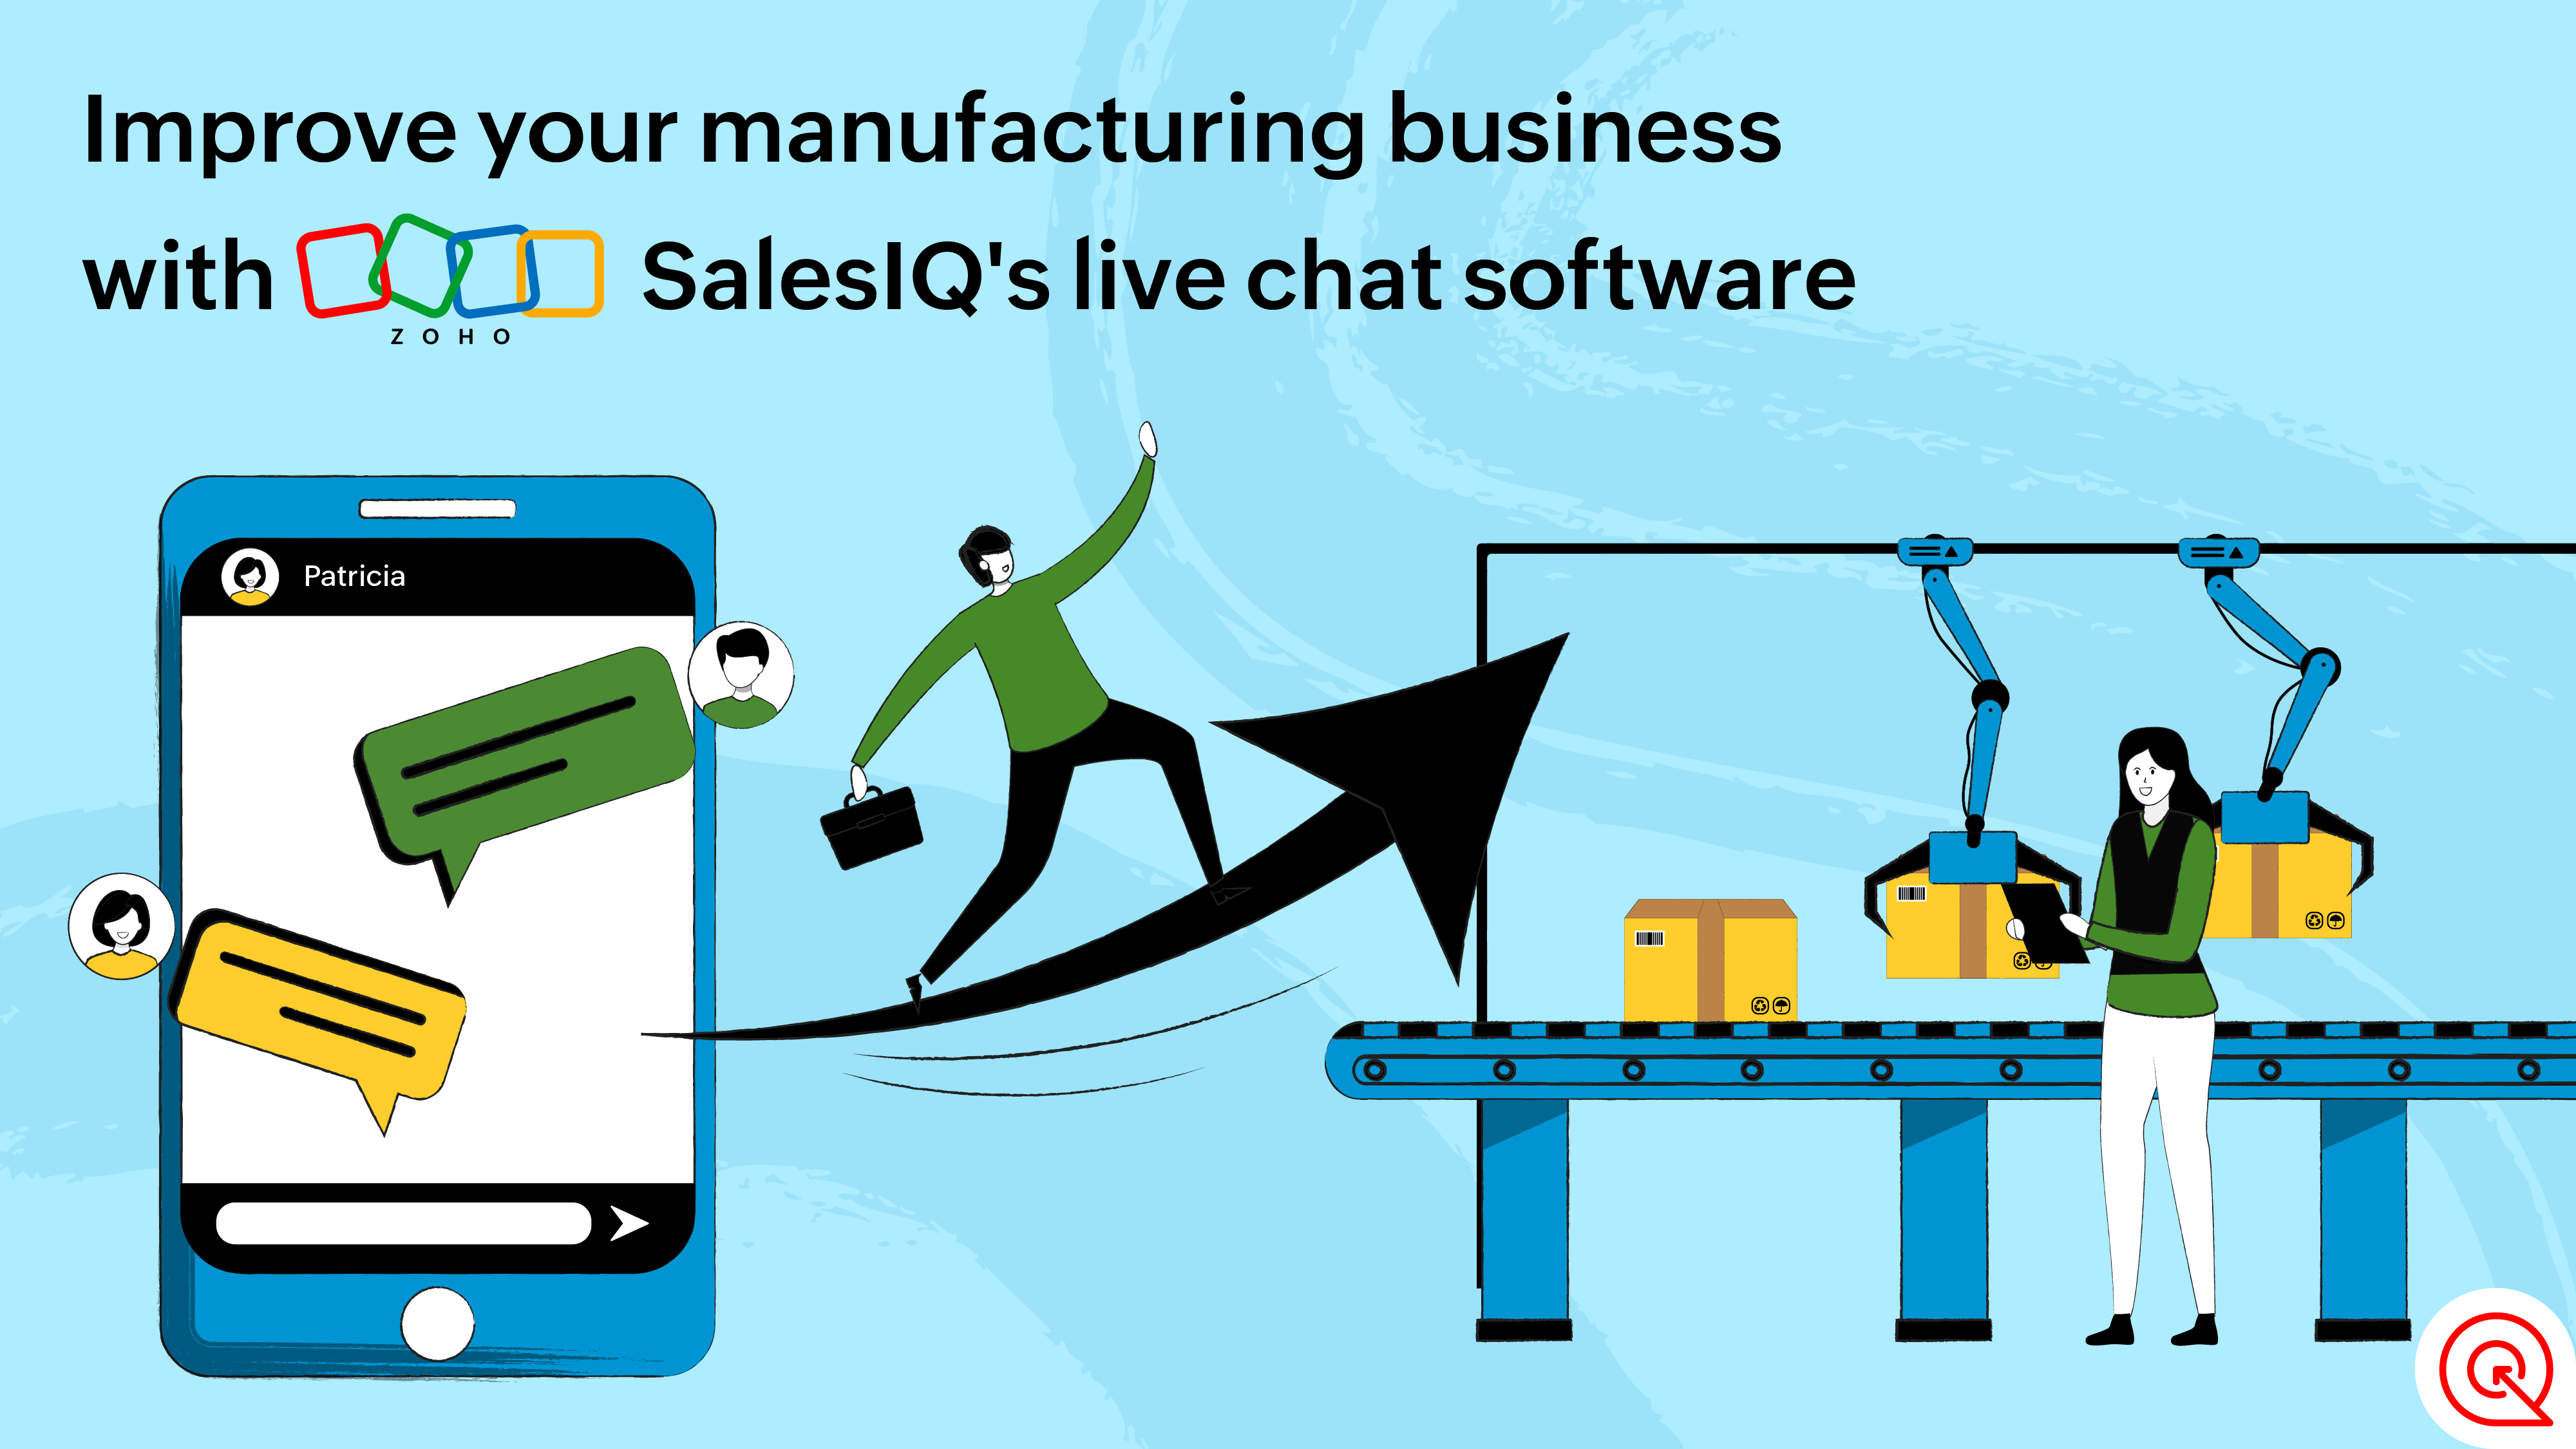 How to improve your manufacturing business with live chat software by Zoho SalesIQ